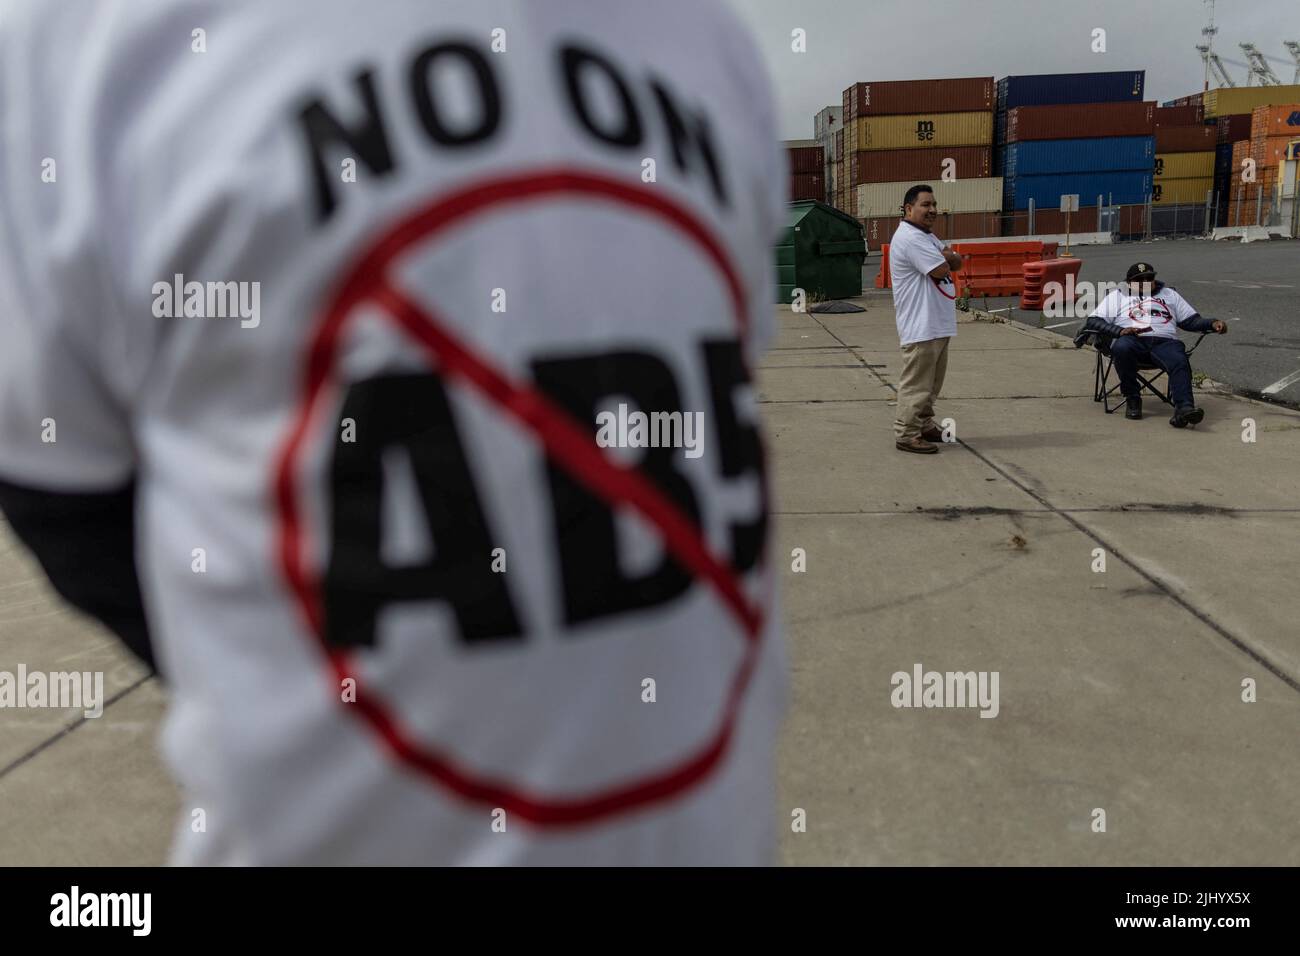 Truck drivers gather to block the entrance of trucks at a container terminal at the Port of Oakland, during a protest against California's law known as AB5, in Oakland, California, July 21, 2022. REUTERS/Carlos Barria Stock Photo